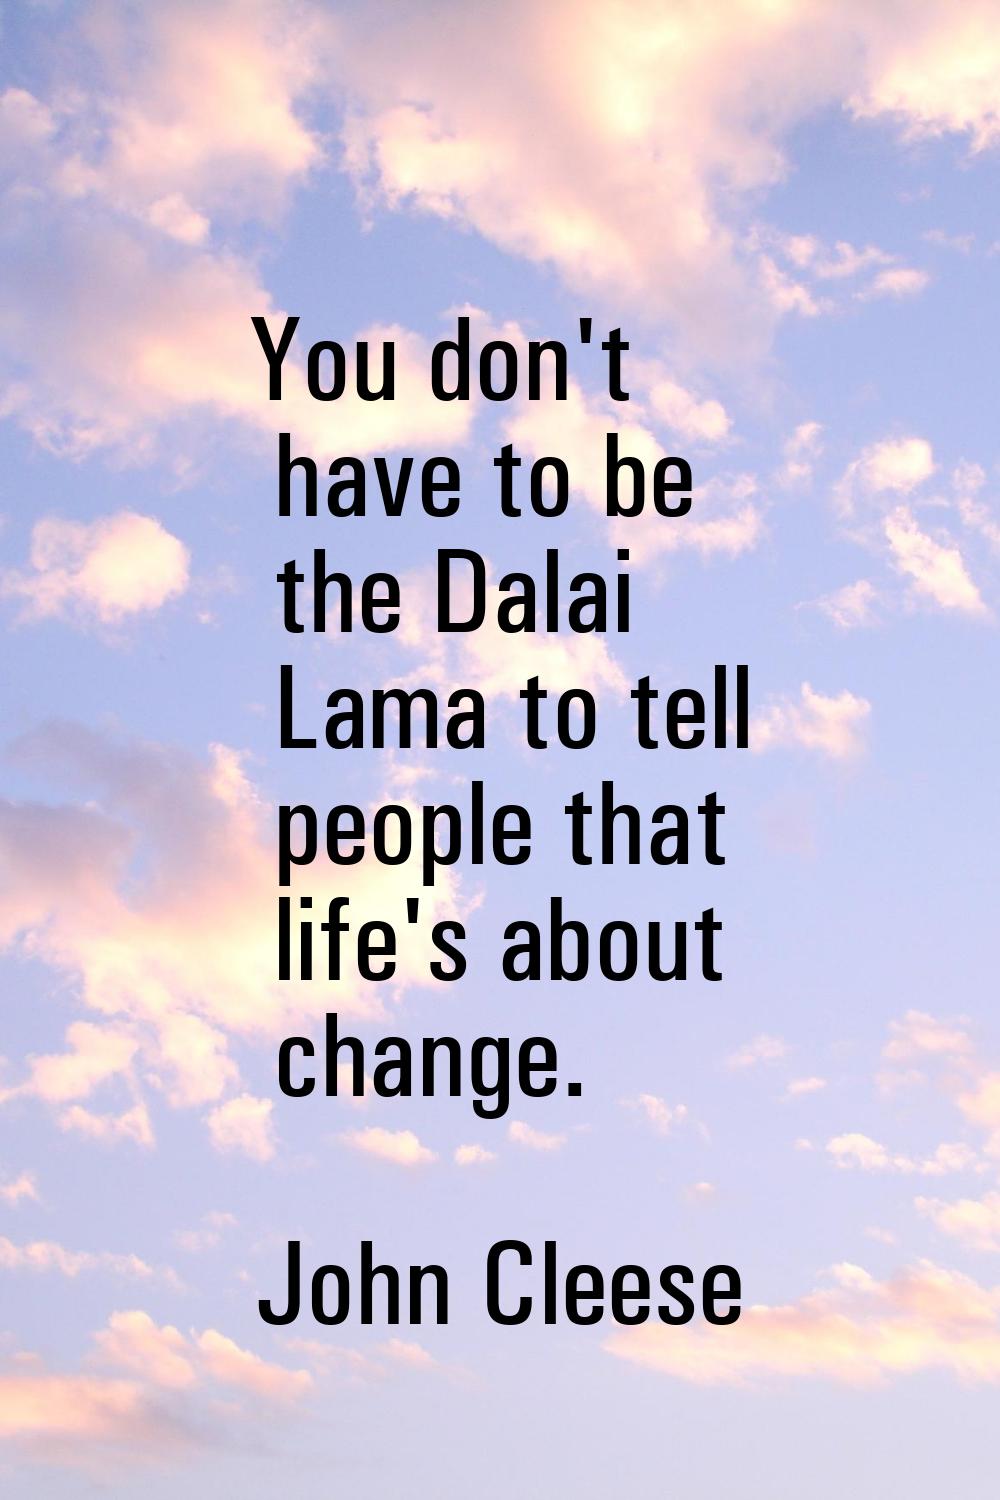 You don't have to be the Dalai Lama to tell people that life's about change.